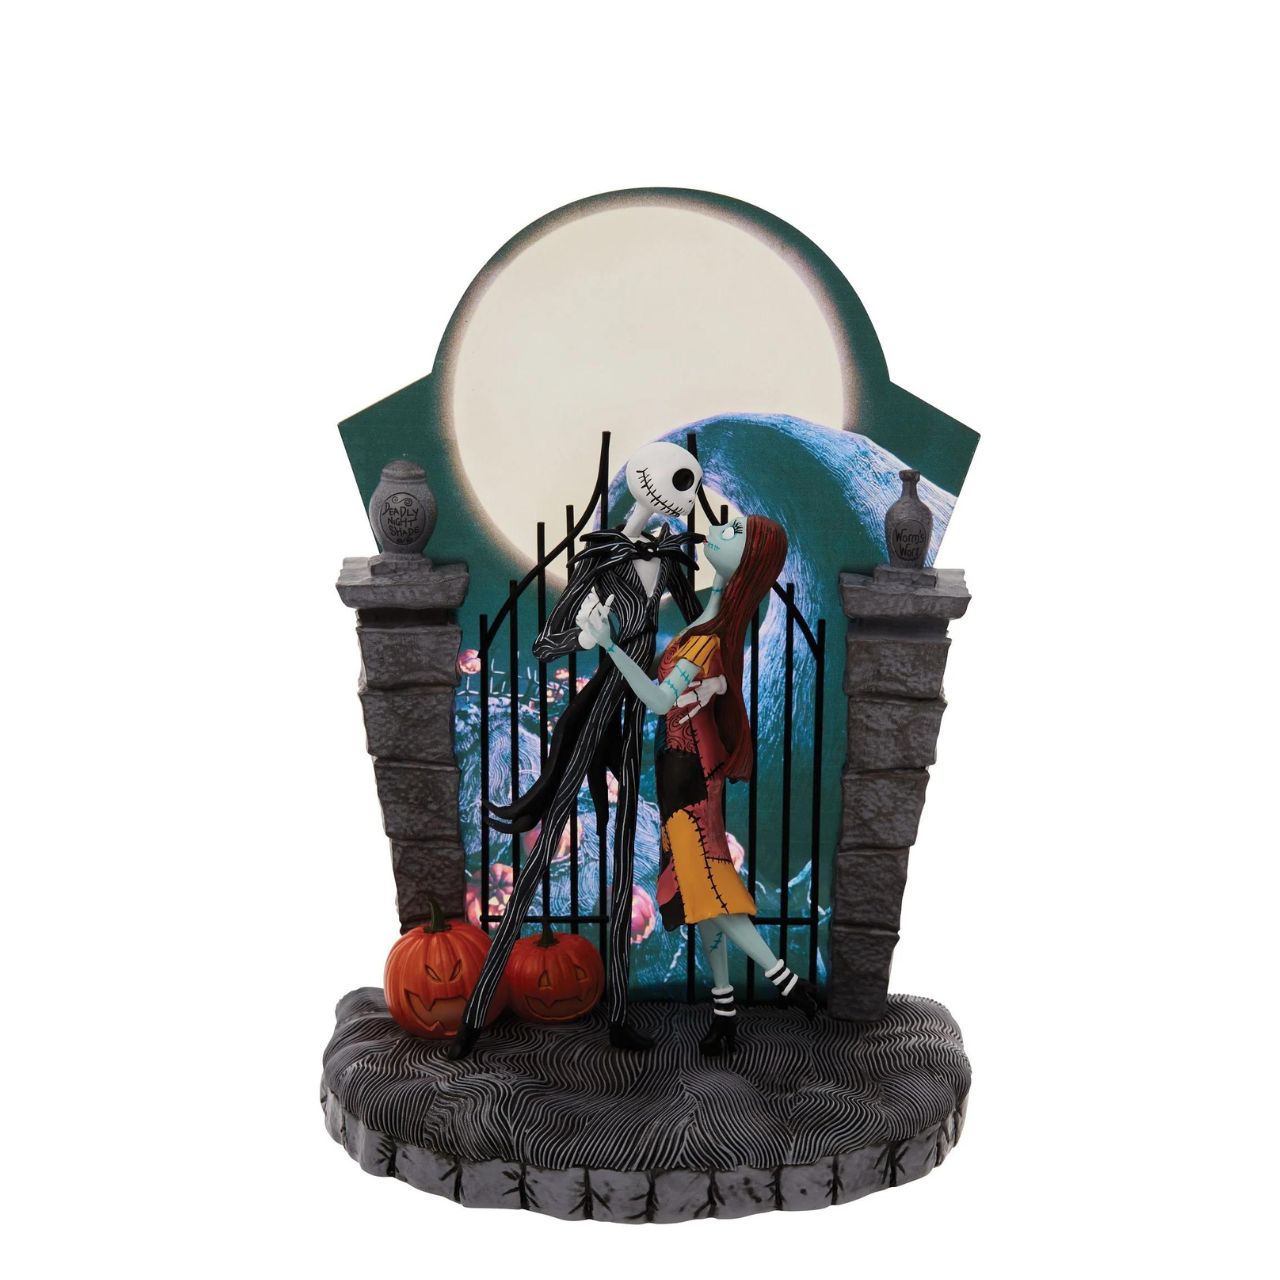 Nightmare Before Christmas Figurine  A lit up Halloween moon forms the back drop of this endearing scene from The Nightmare Before Christmas. Jack and Sally's graveyard waltz is frozen in time with only jack-o-lanterns as their witnesses.